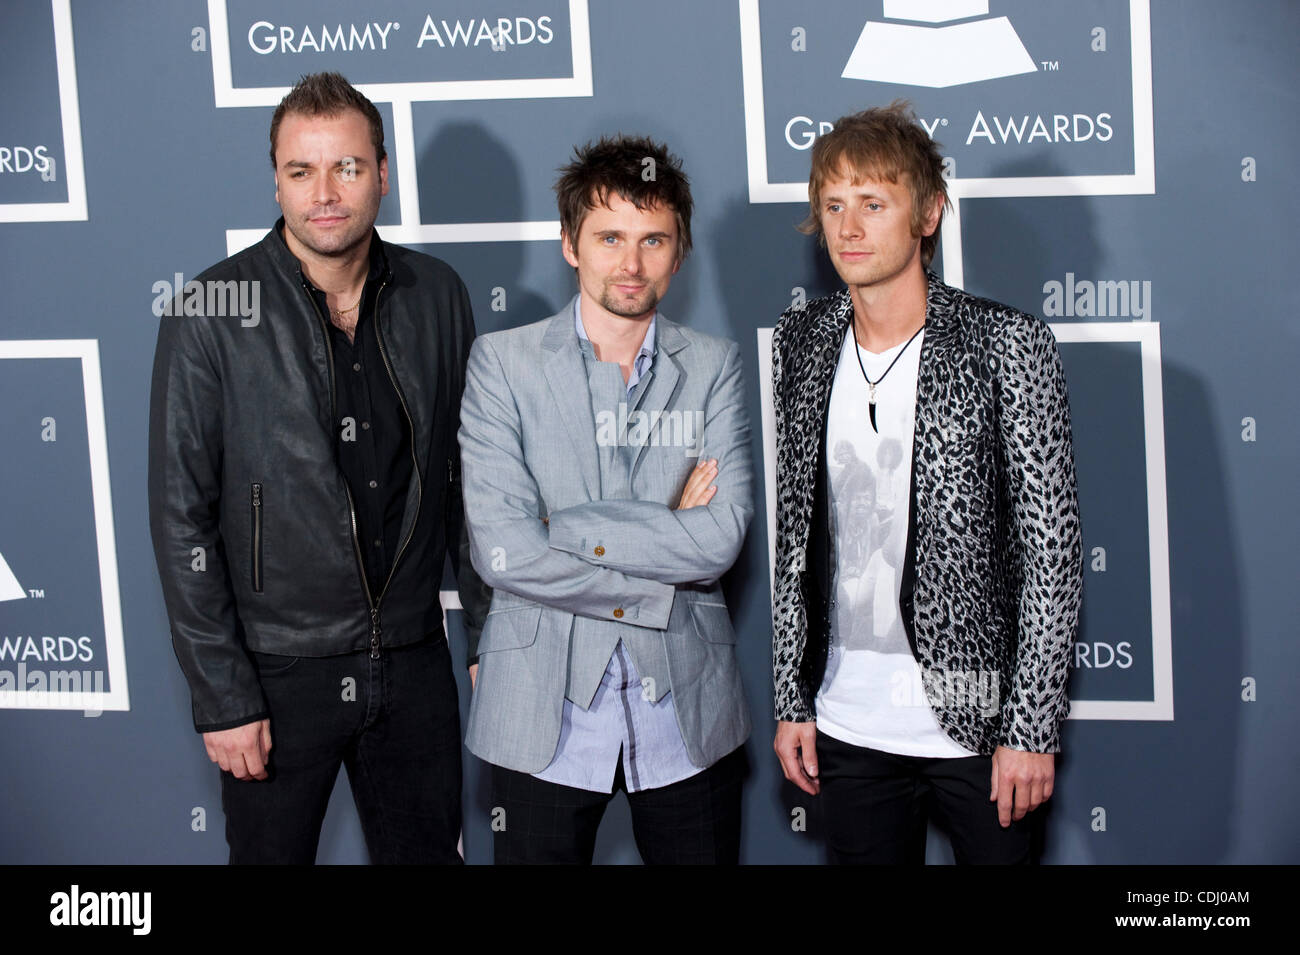 Feb 13, 2011 - Los Angeles, California, U.S. - The British band Muse (L-R) CHRISTOPHER WOLSTENHOLME, MATTHEW BELLAMY, and DOMINIC HOWARD, arrives for the Grammy Awards show at Staples Center. (Credit: &#169; Kevin Sullivan/ZUMAPRESS.com) Stock Photo